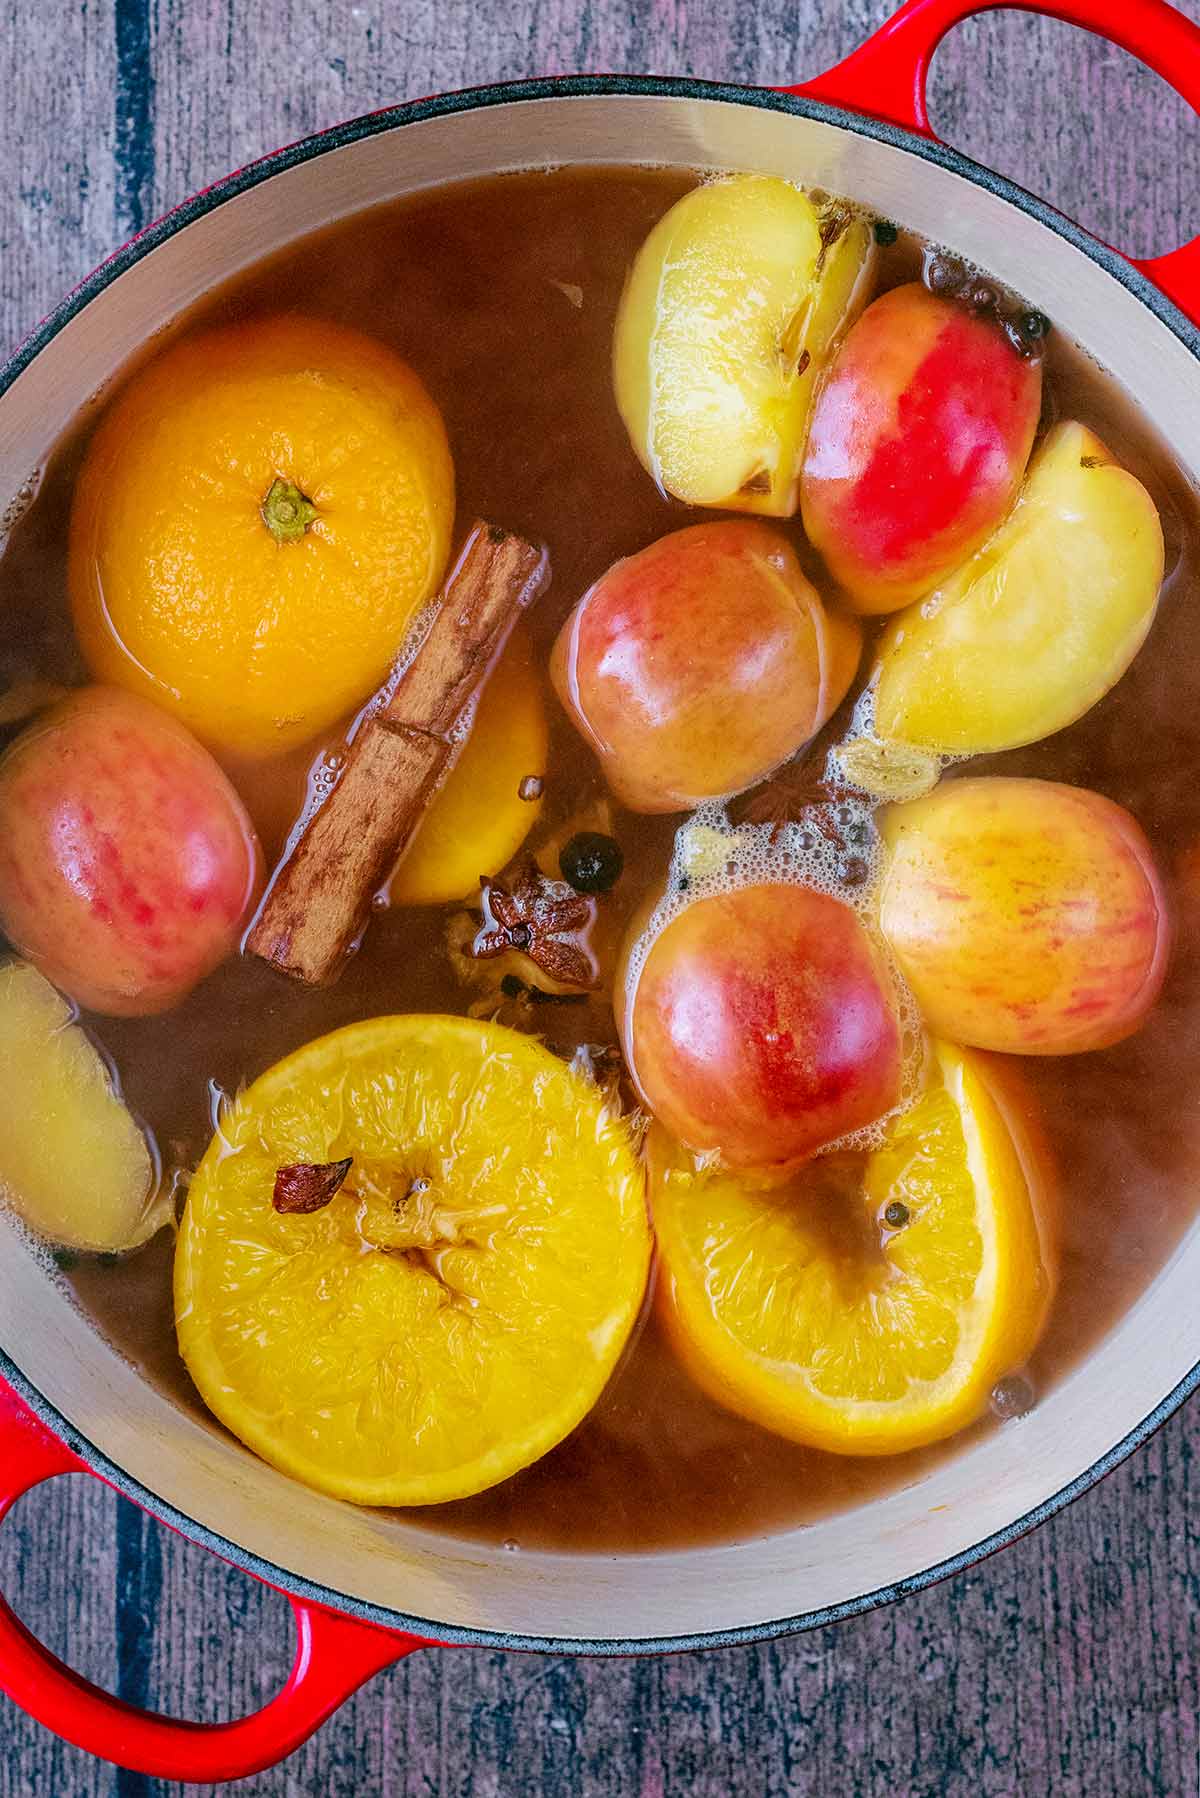 Apples, oranges, cinnamon sticks and spices in a liquid in a pan.